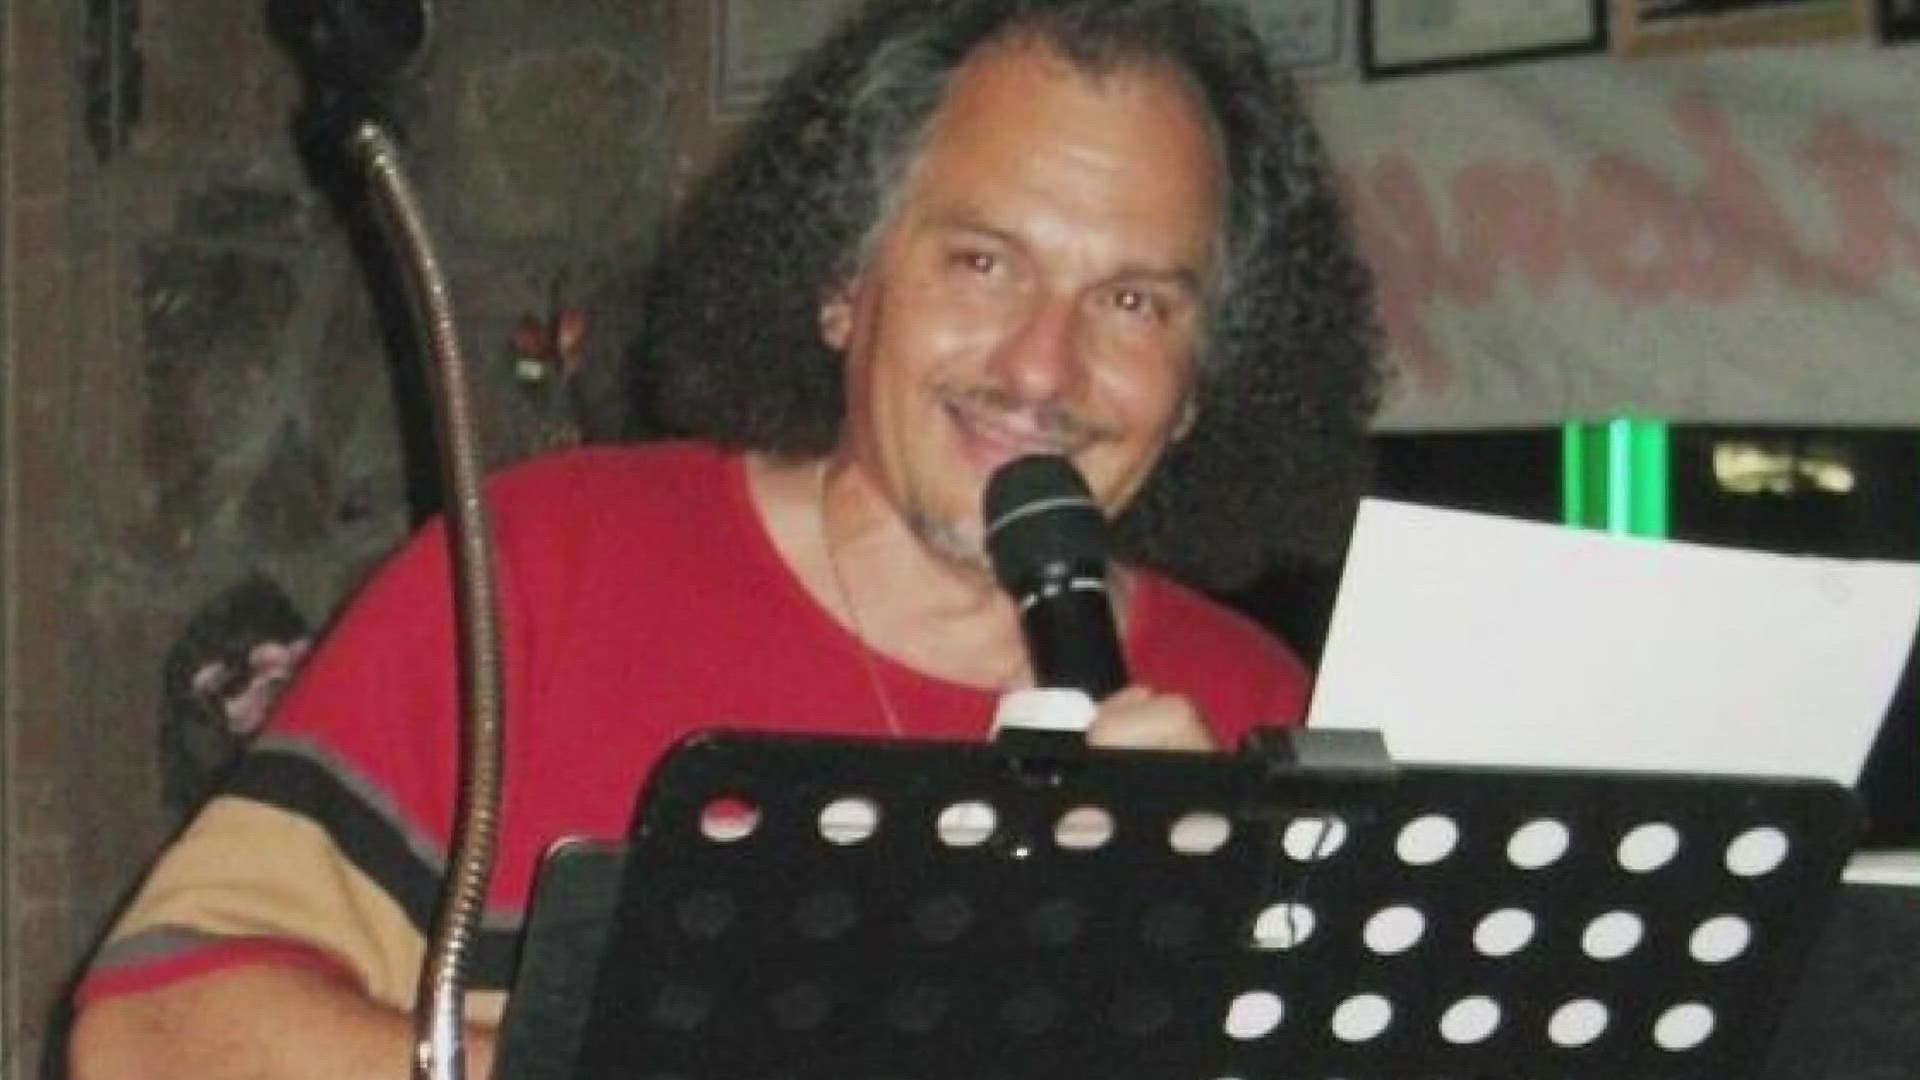 Anthony Bellante was popular on the Dallas Music scene. This week, he died of COVID.